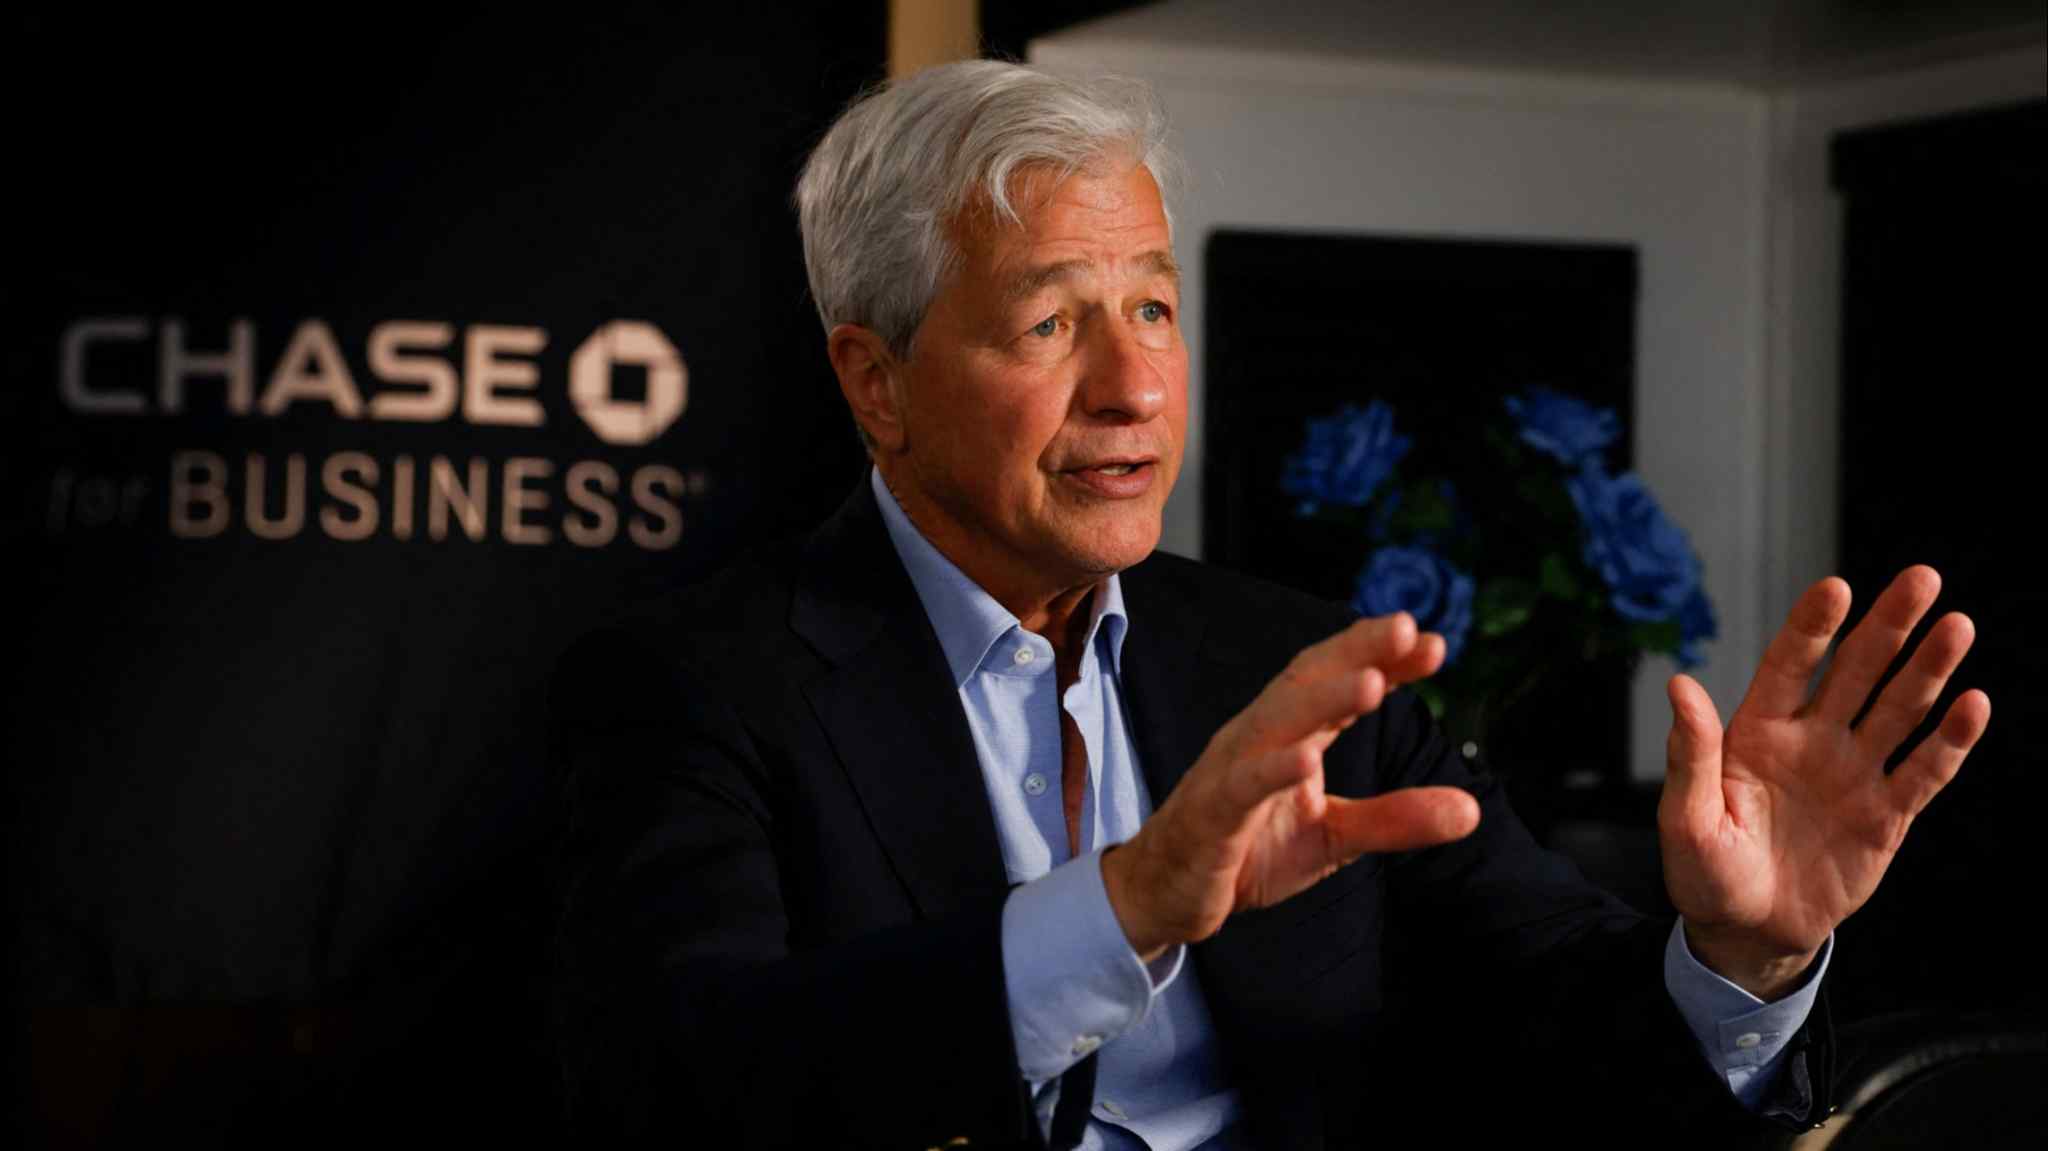 ‘Ultimate decider’ on Epstein was JPMorgan’s ex-top lawyer, says Dimon